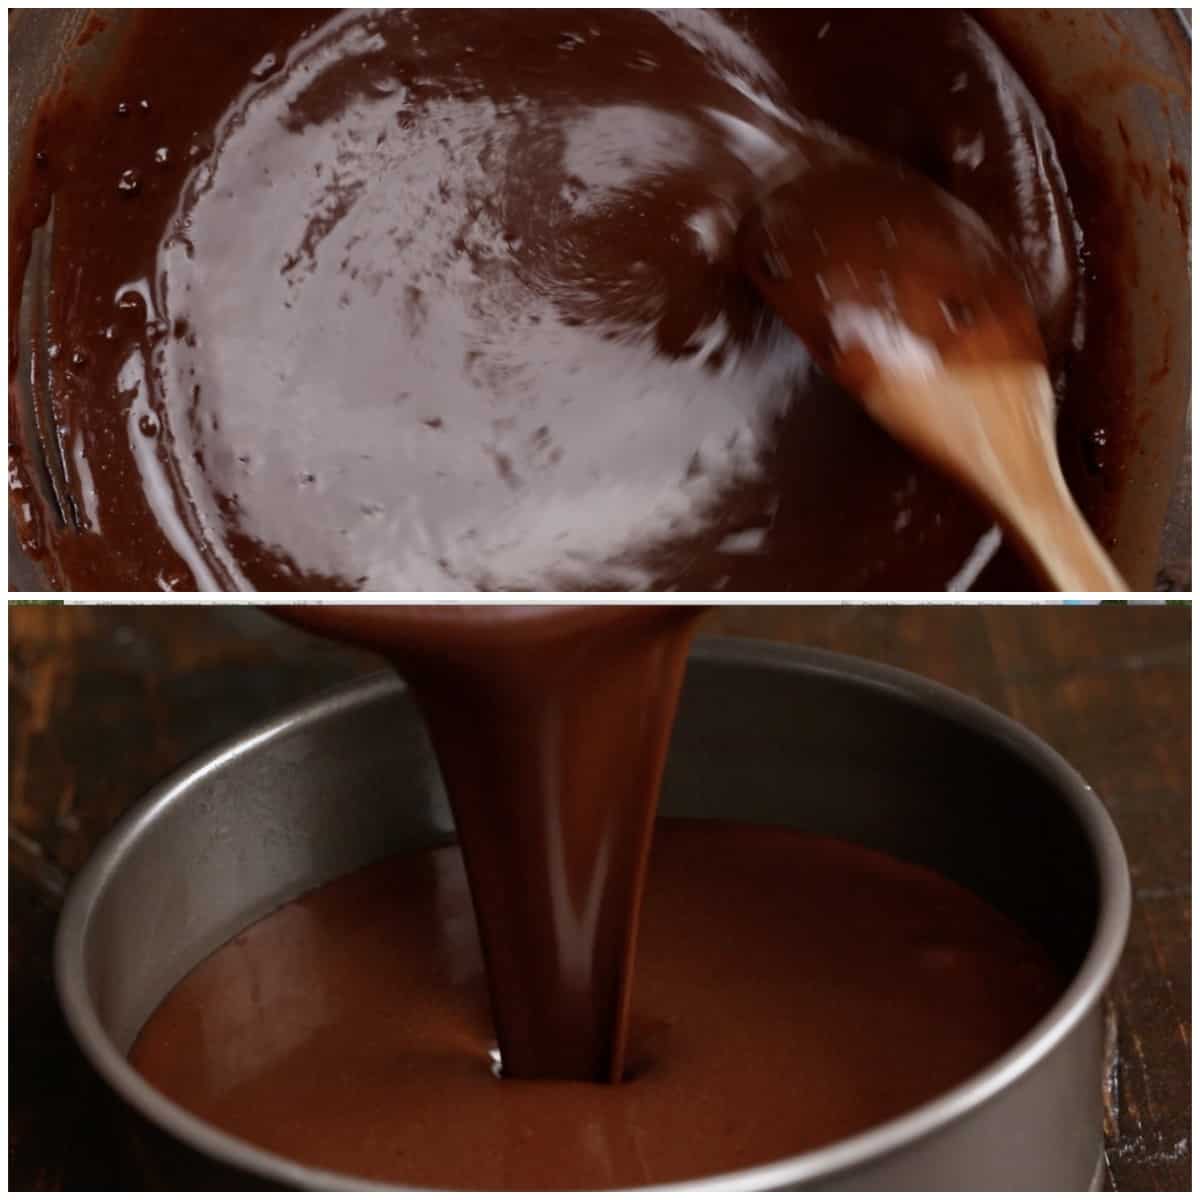 Details more than 64 chocolate cake batter recipe latest